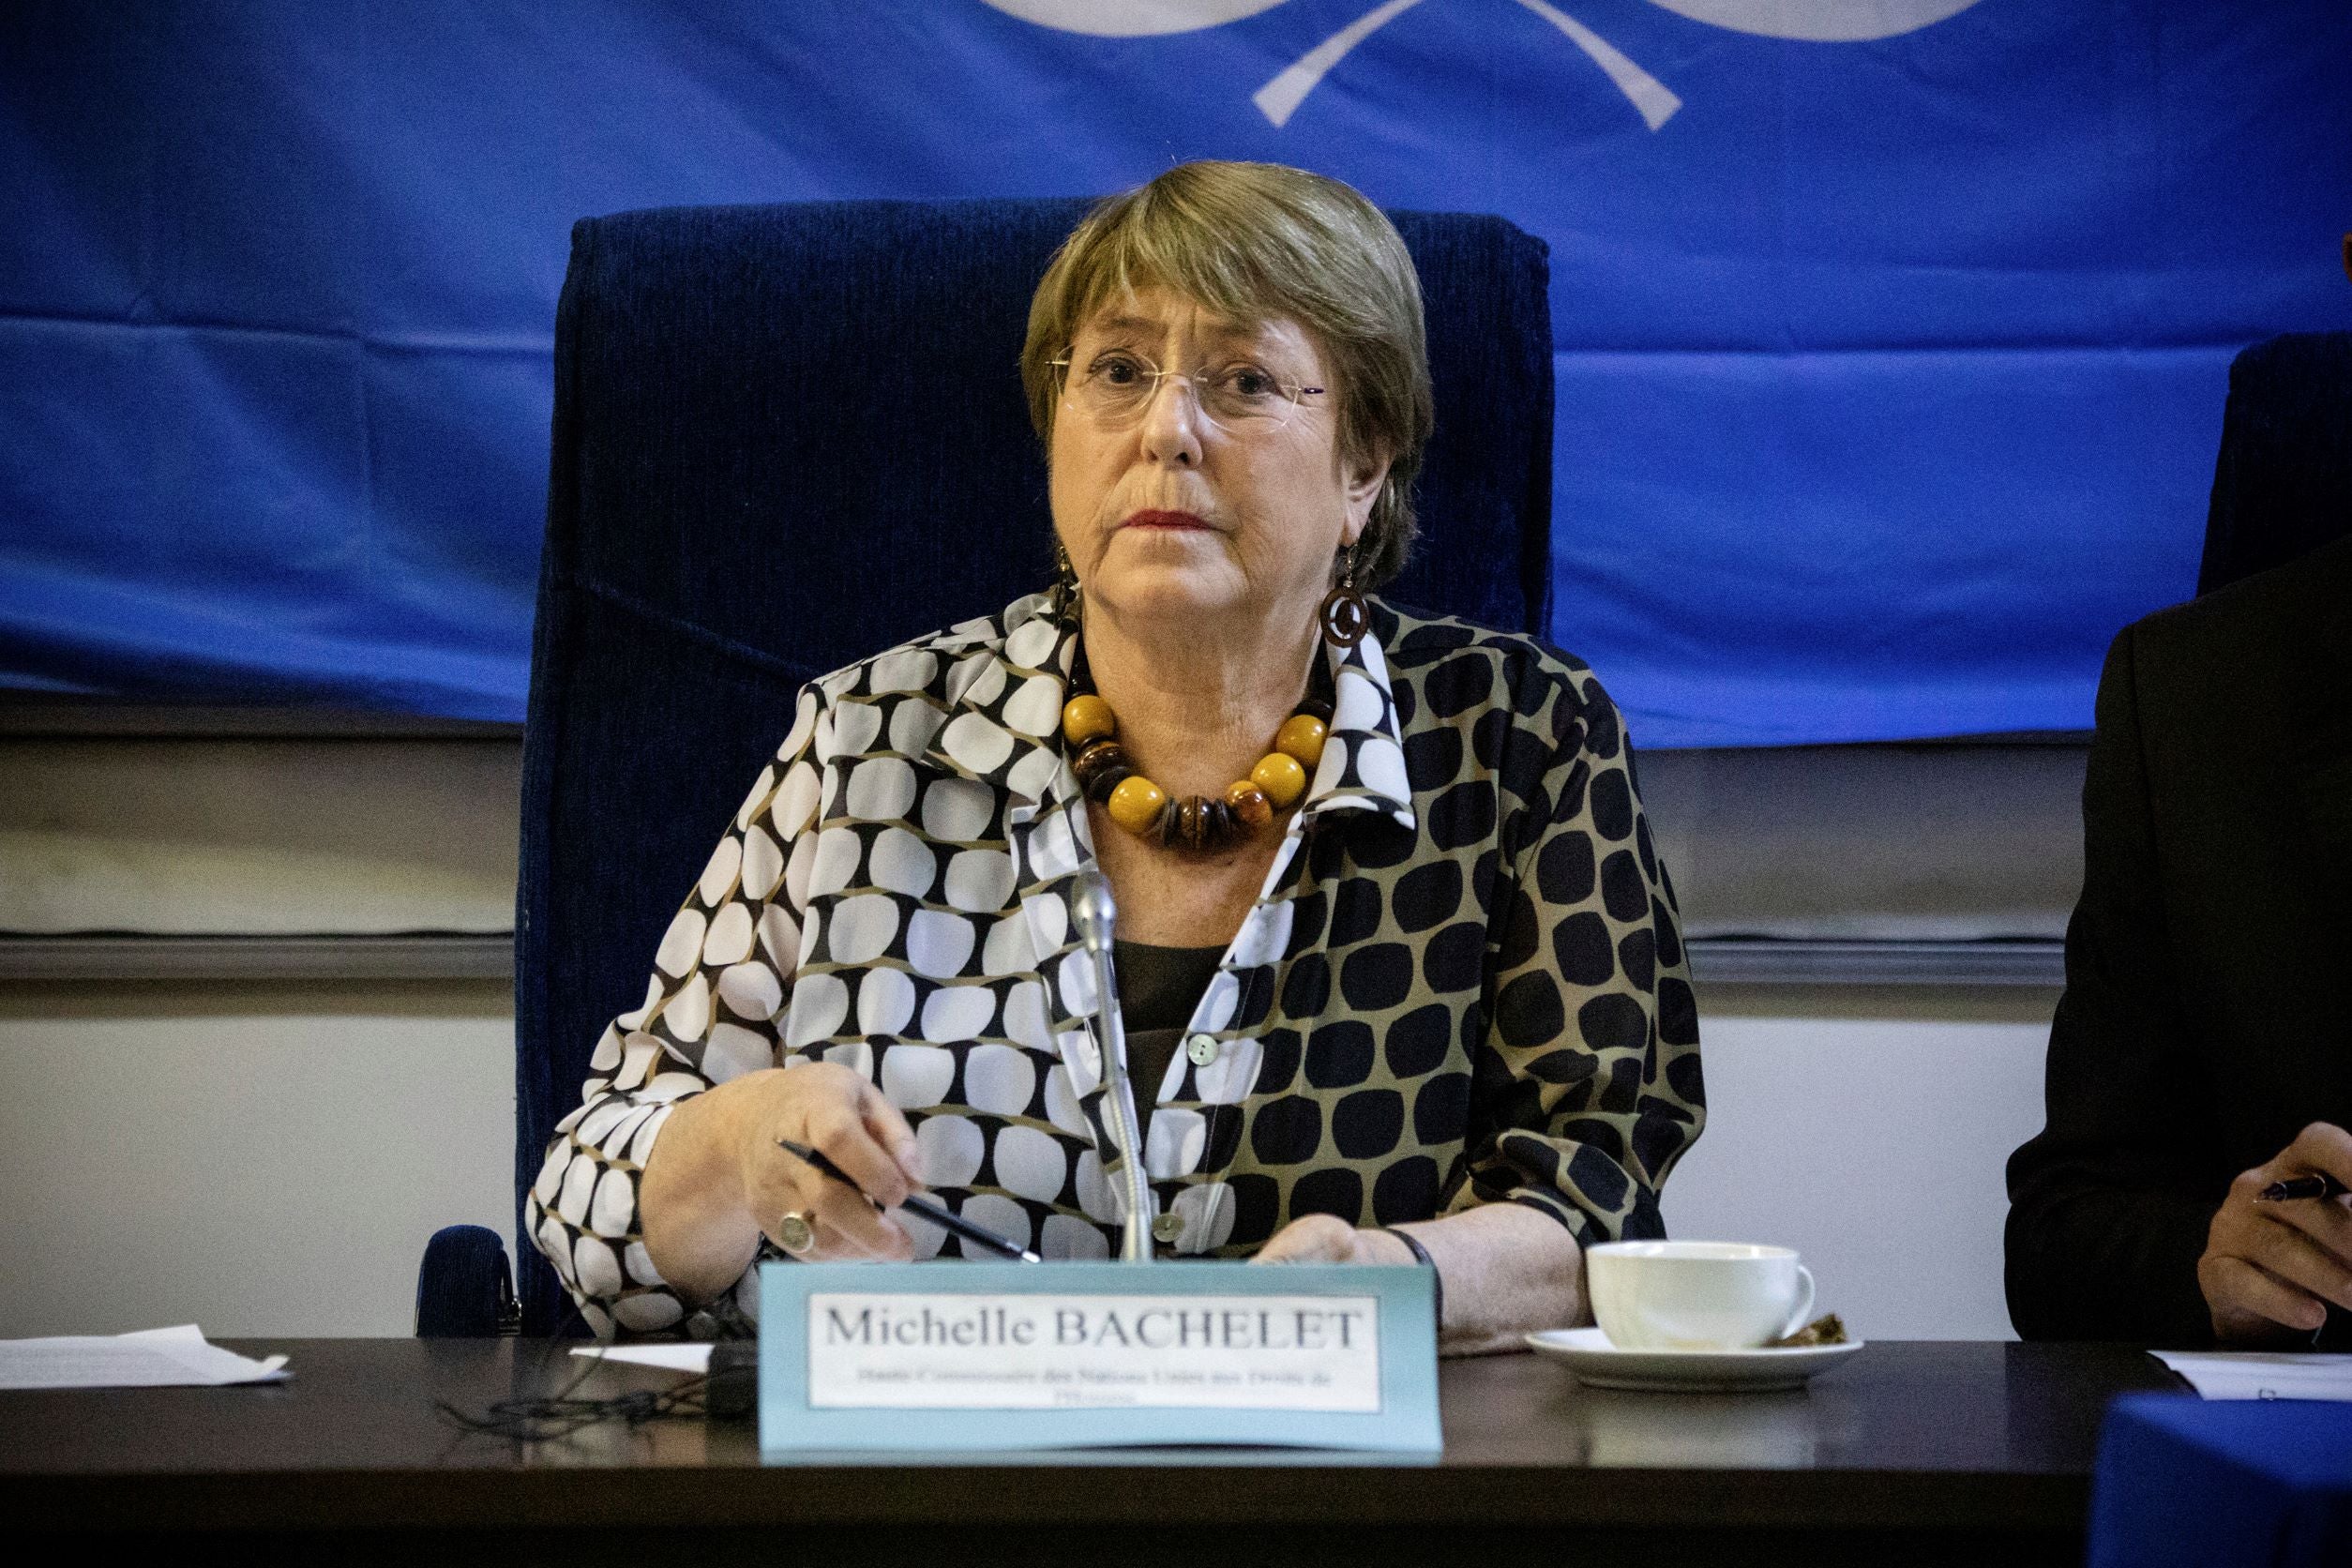 UN High Commissioner for Human Rights Michelle Bachelet addresses a news conference in Ouagadougou, Burkina Faso.